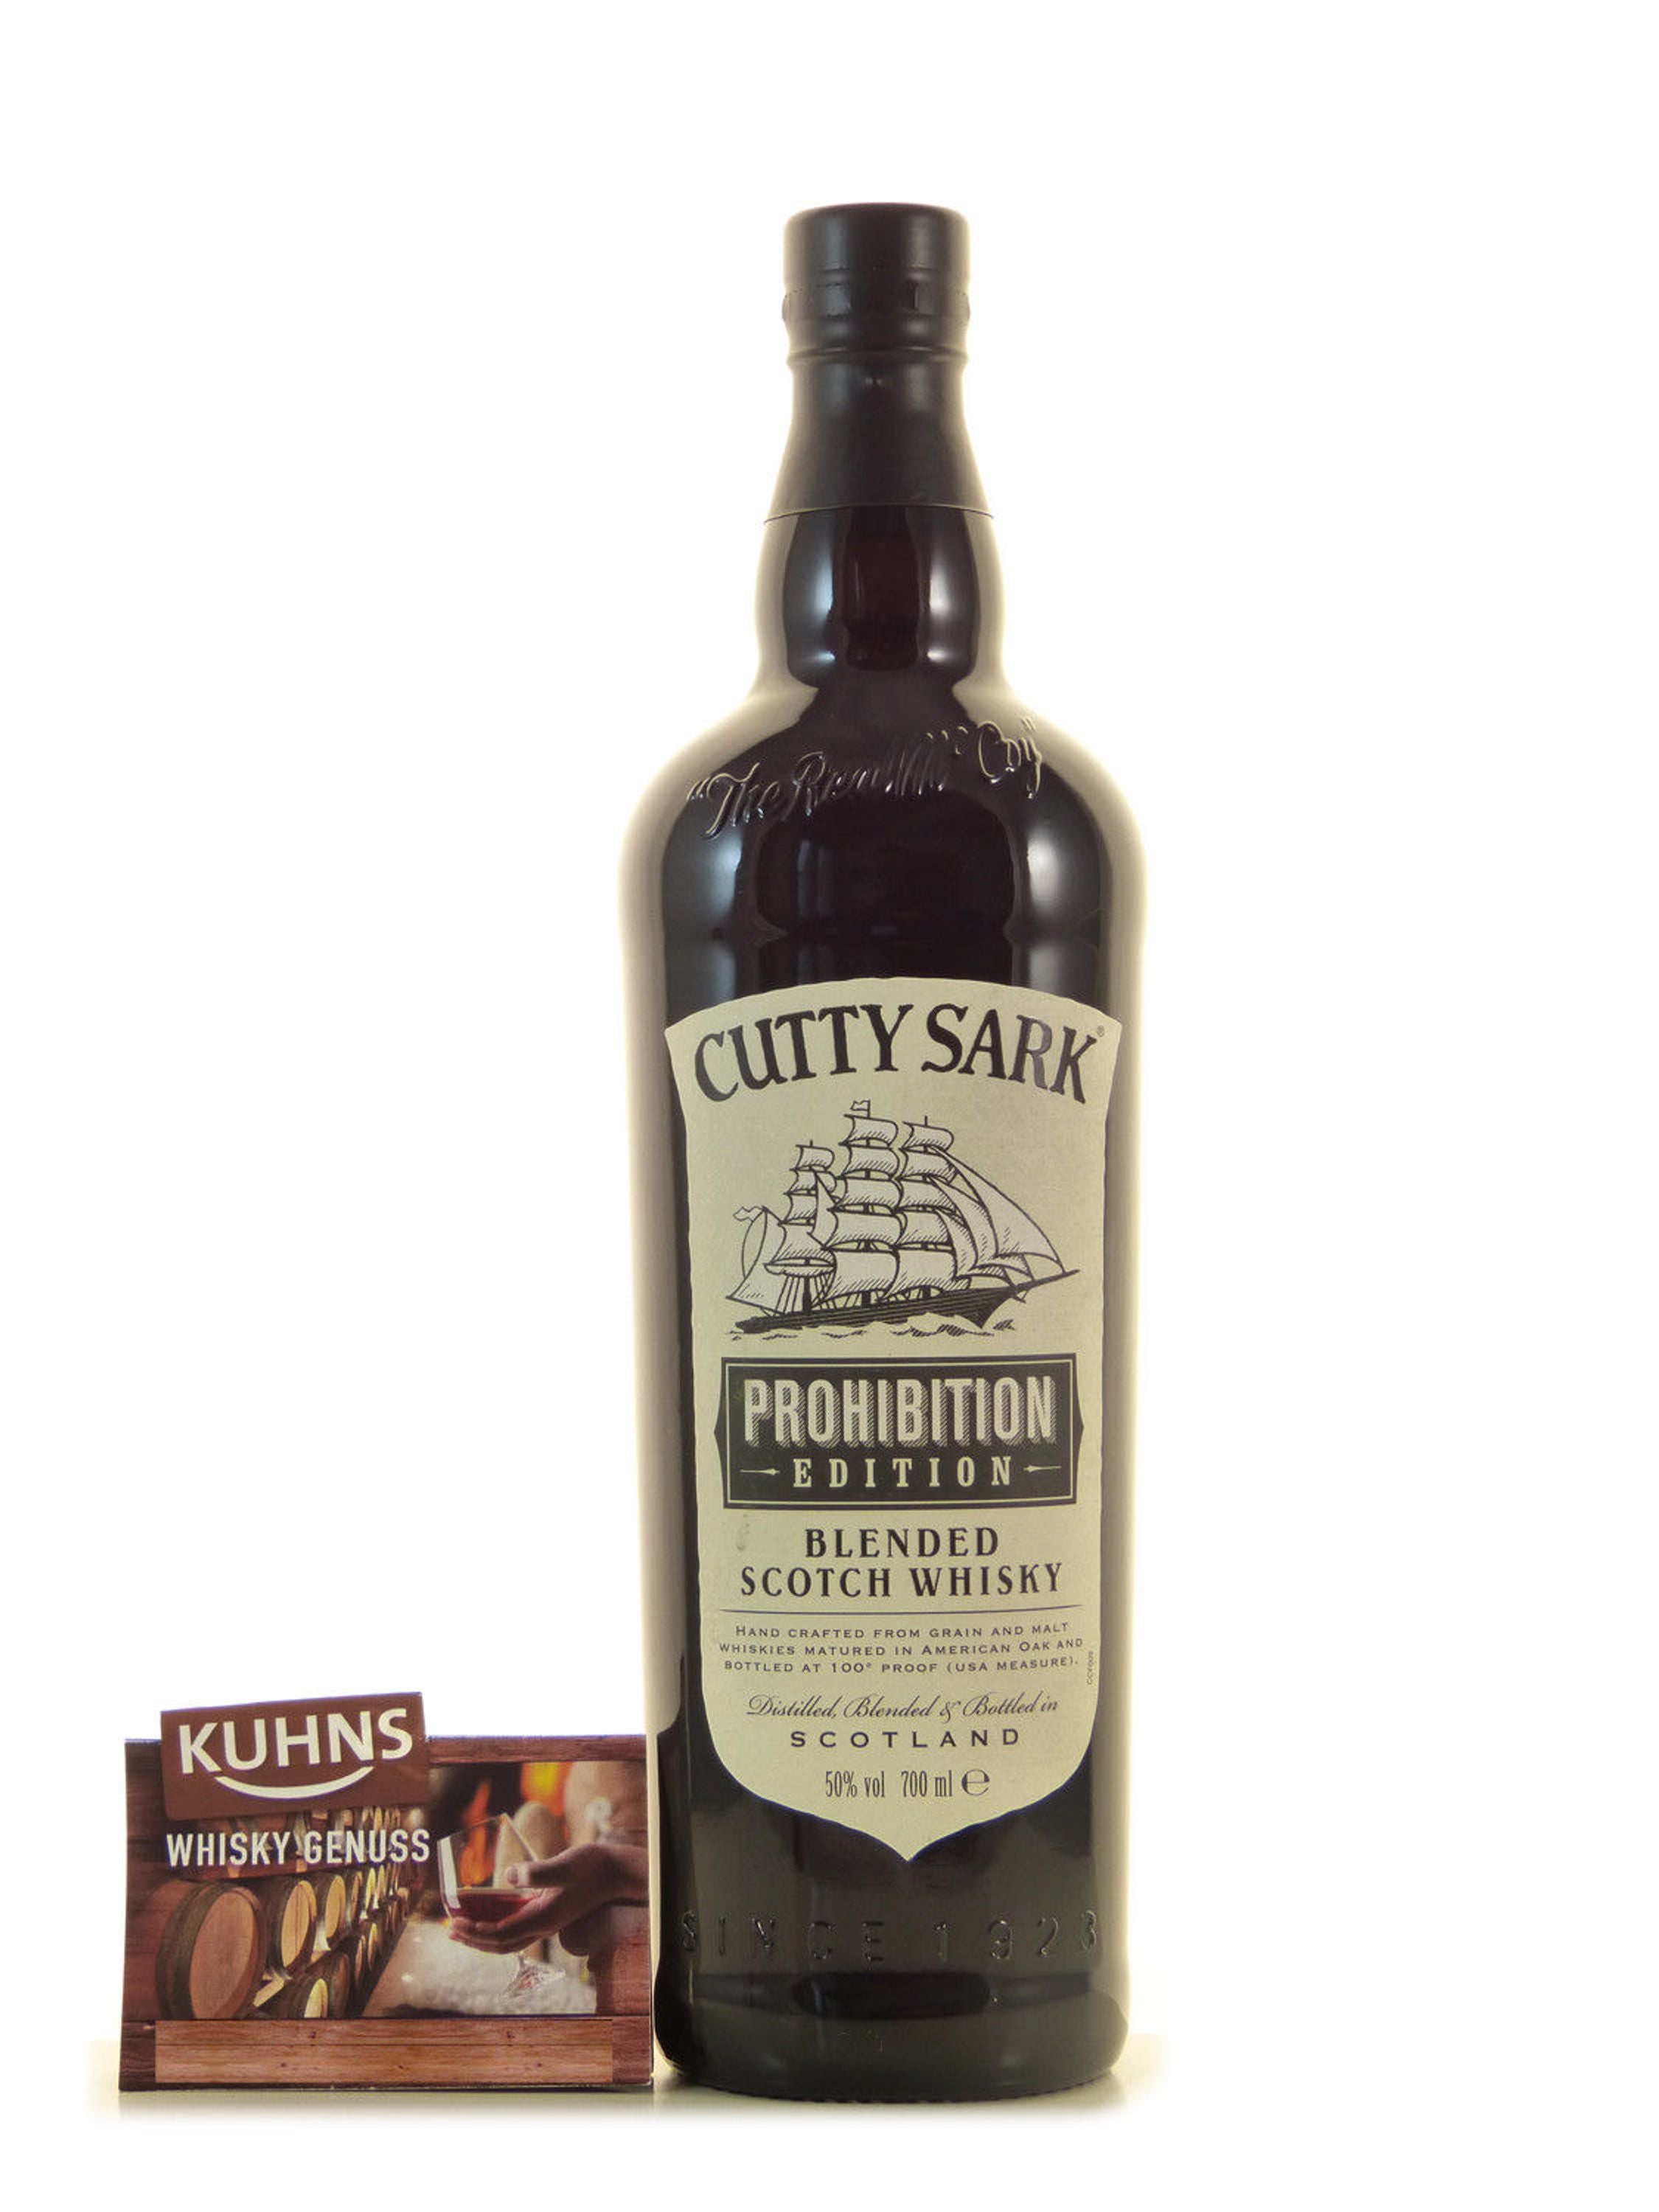 Cutty Sark Prohibition Edition Blended Scotch Whisky 0,7l, alc. 50 Vol.-%